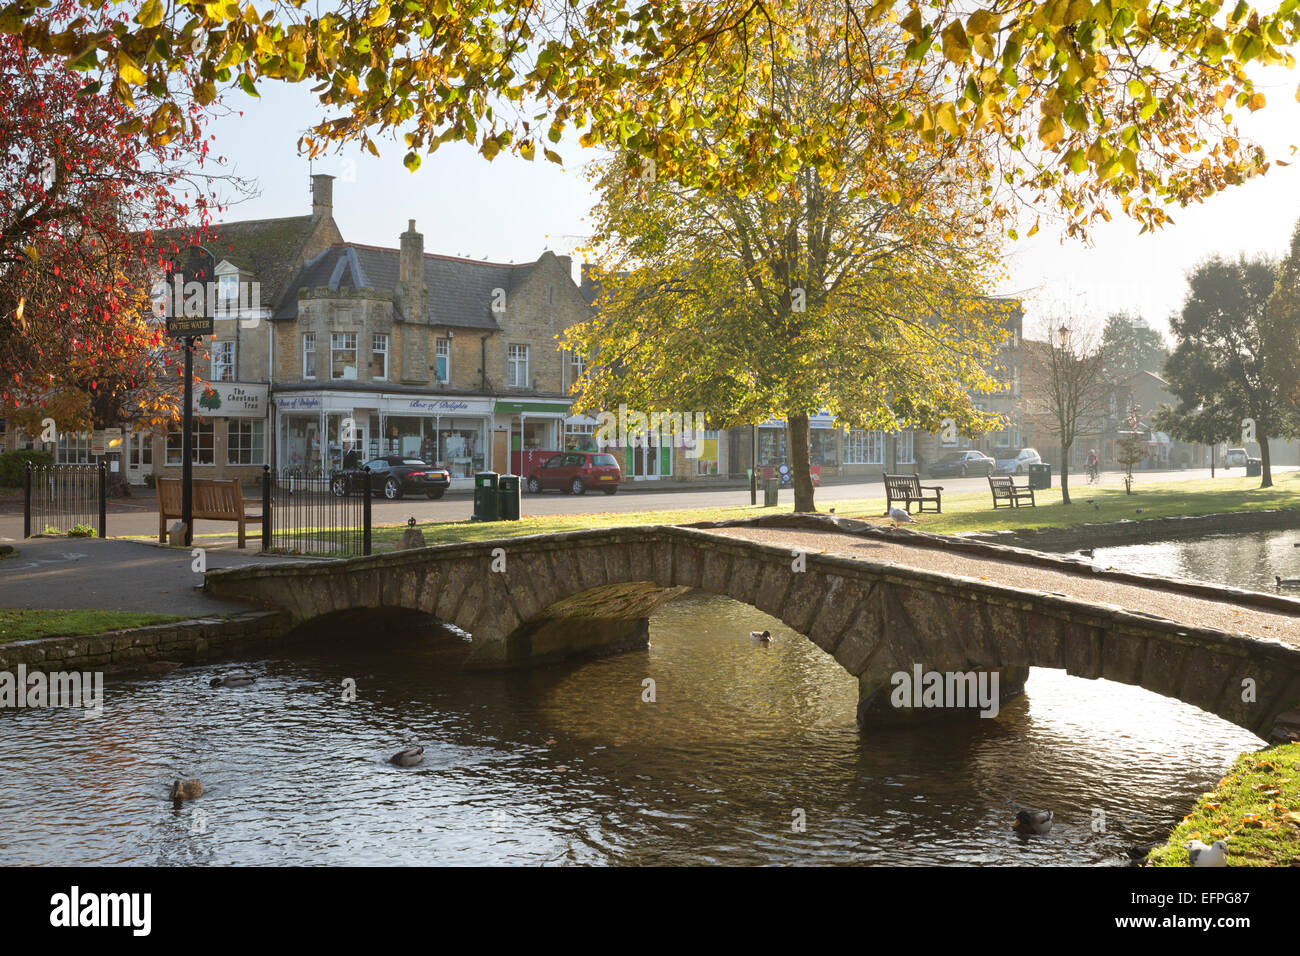 High Street and bridge over River Windrush, Bourton-on-the-Water, Cotswolds, Gloucestershire, England, United Kingdom, Europe Stock Photo